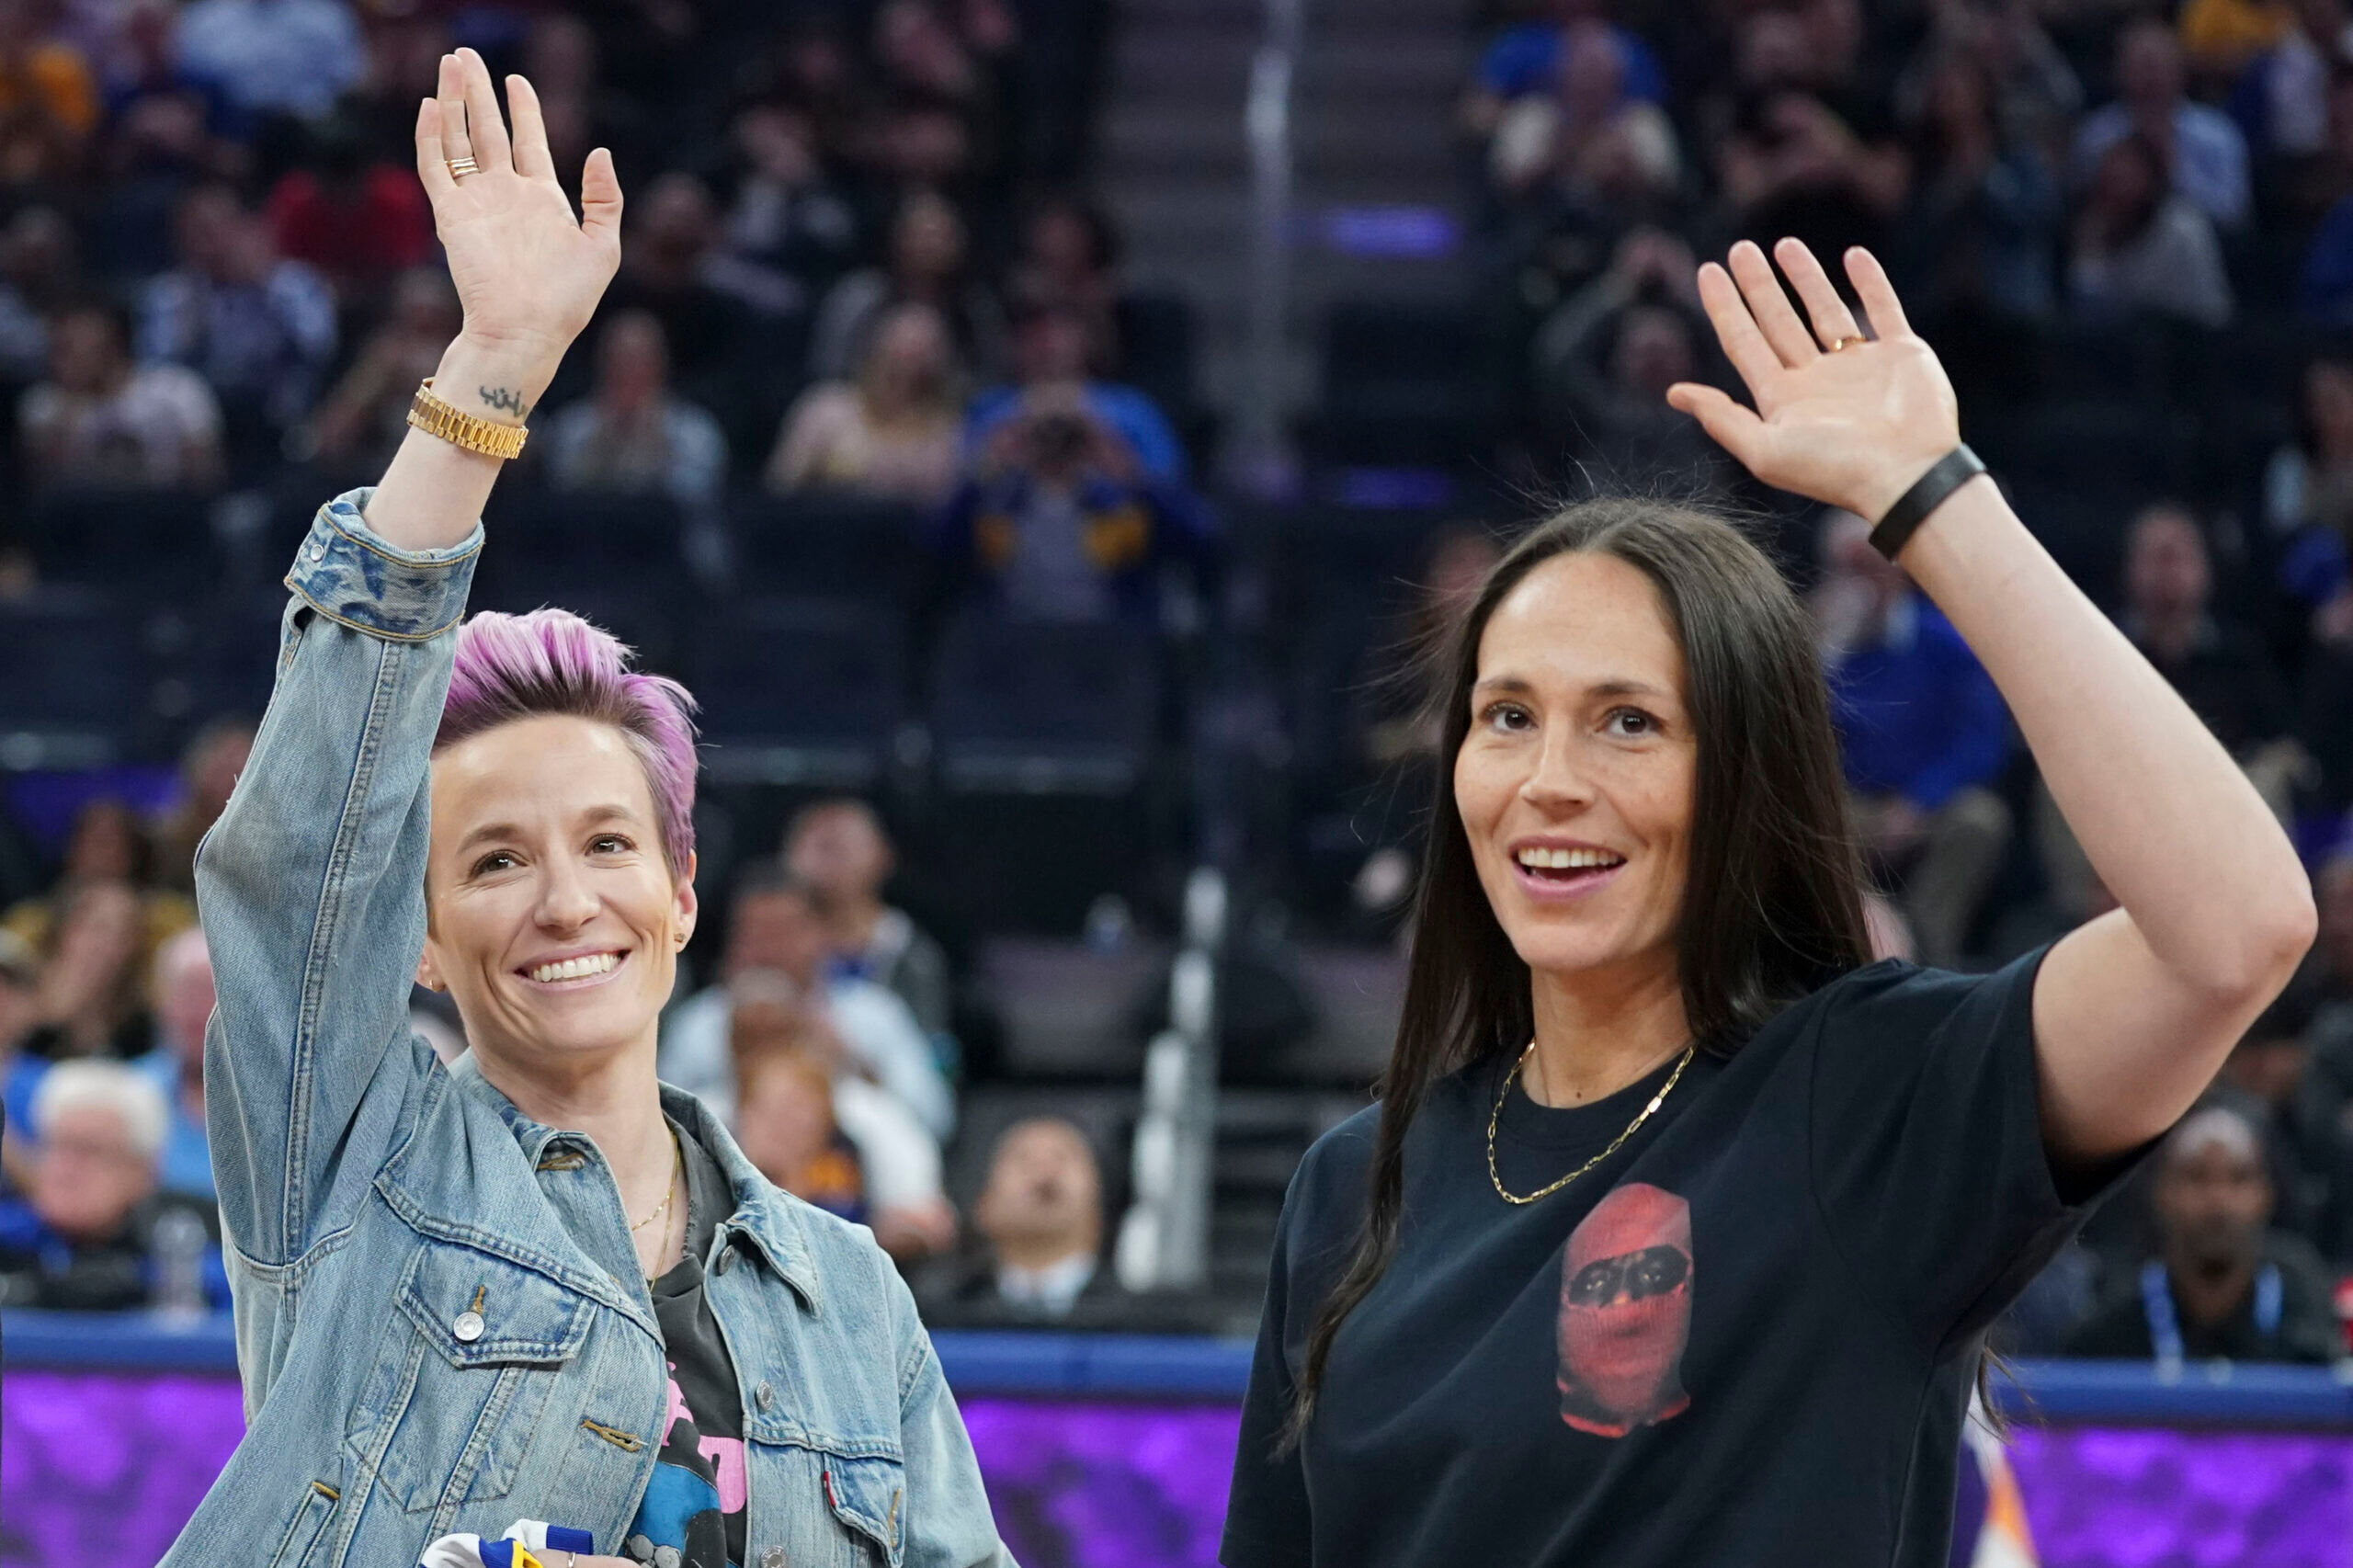 October 30, 2019; San Francisco, CA, USA; Megan Rapinoe (left) and Sue Bird (right) wave during the second quarter between the Golden State Warriors and the Phoenix Suns at Chase Center. Mandatory Credit: Kyle Terada-USA TODAY Sports